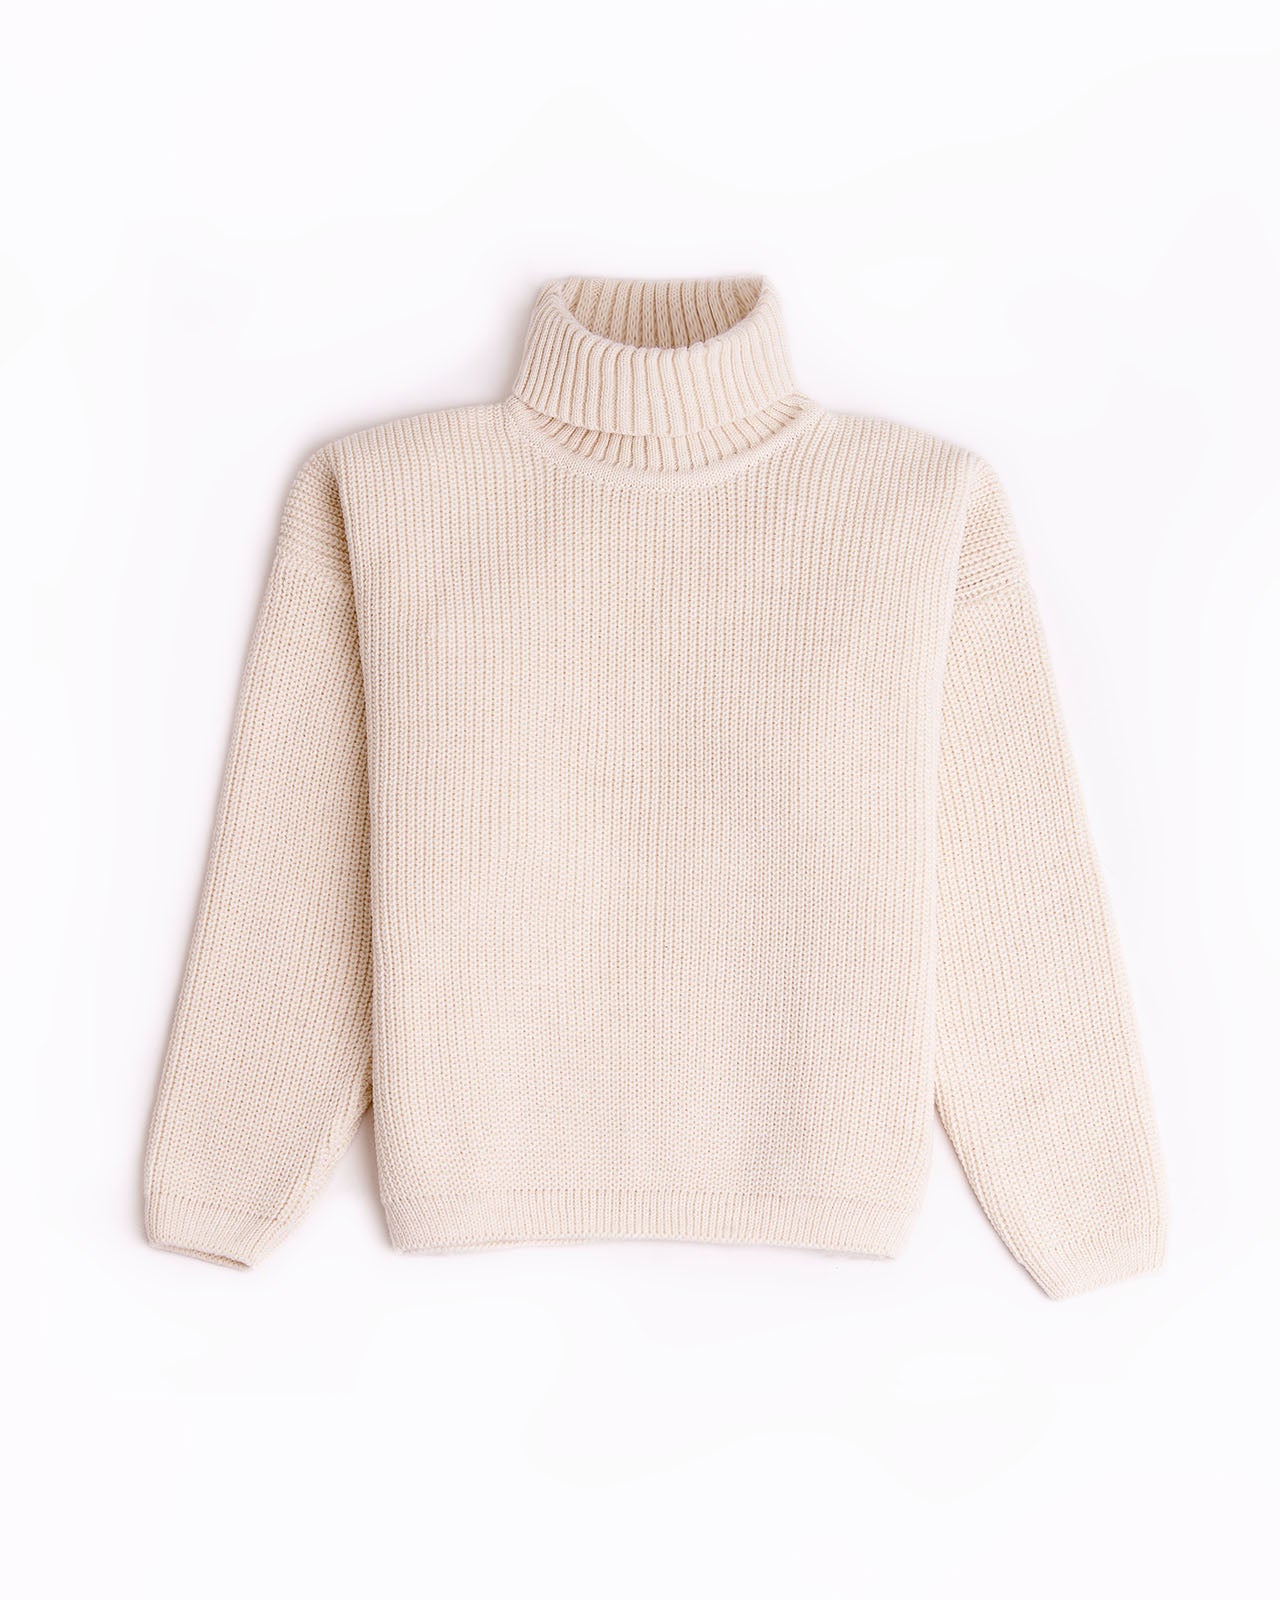 Oversized high neck sweater in white colour